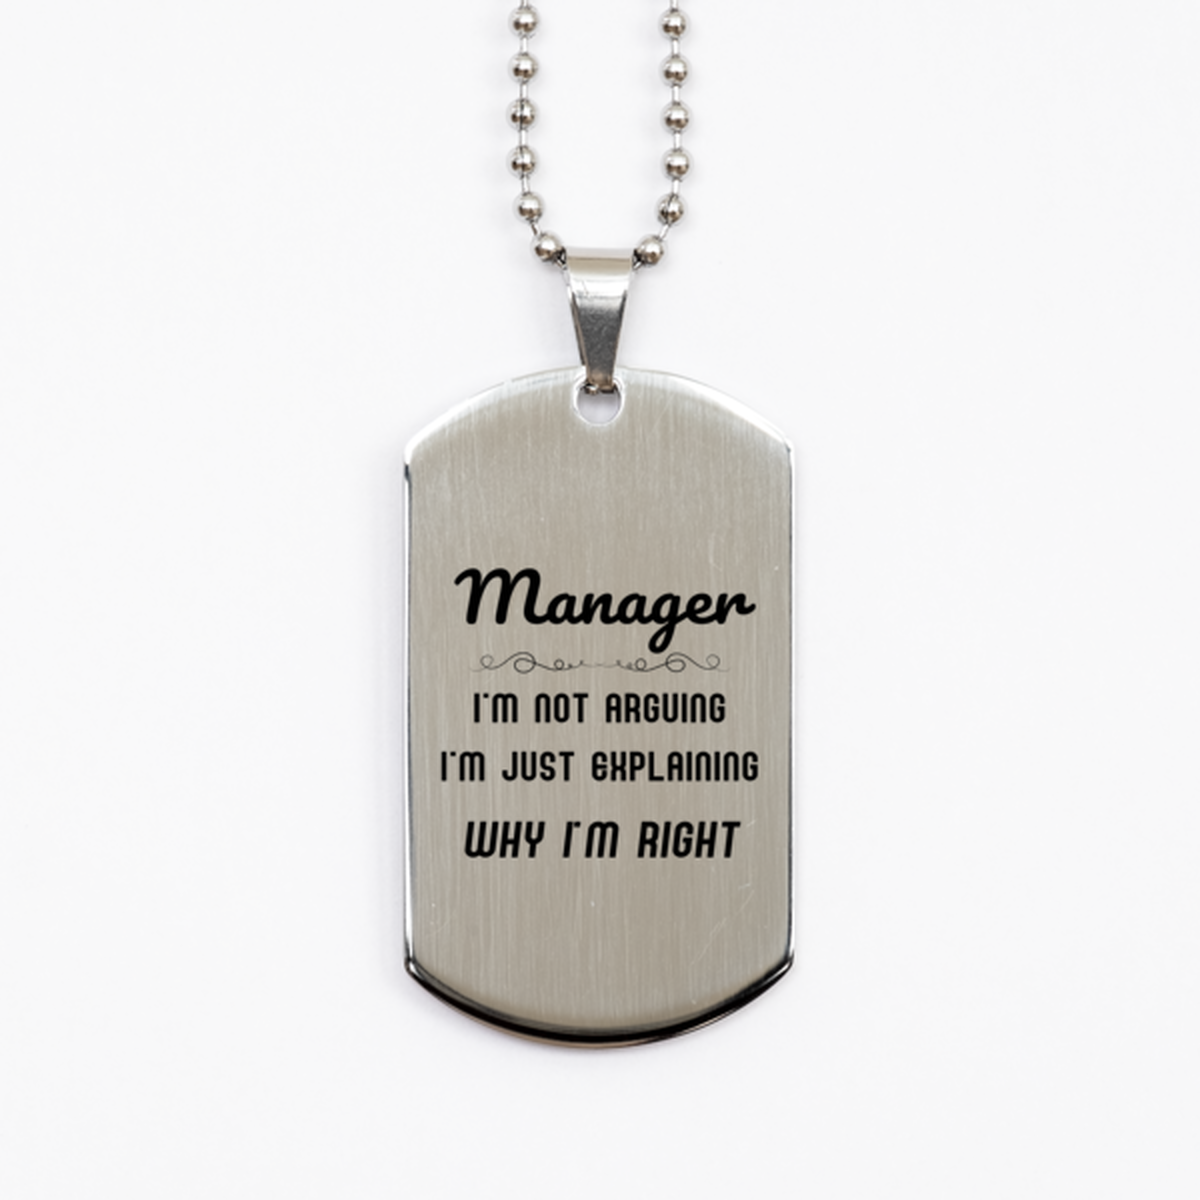 Manager I'm not Arguing. I'm Just Explaining Why I'm RIGHT Silver Dog Tag, Funny Saying Quote Manager Gifts For Manager Graduation Birthday Christmas Gifts for Men Women Coworker